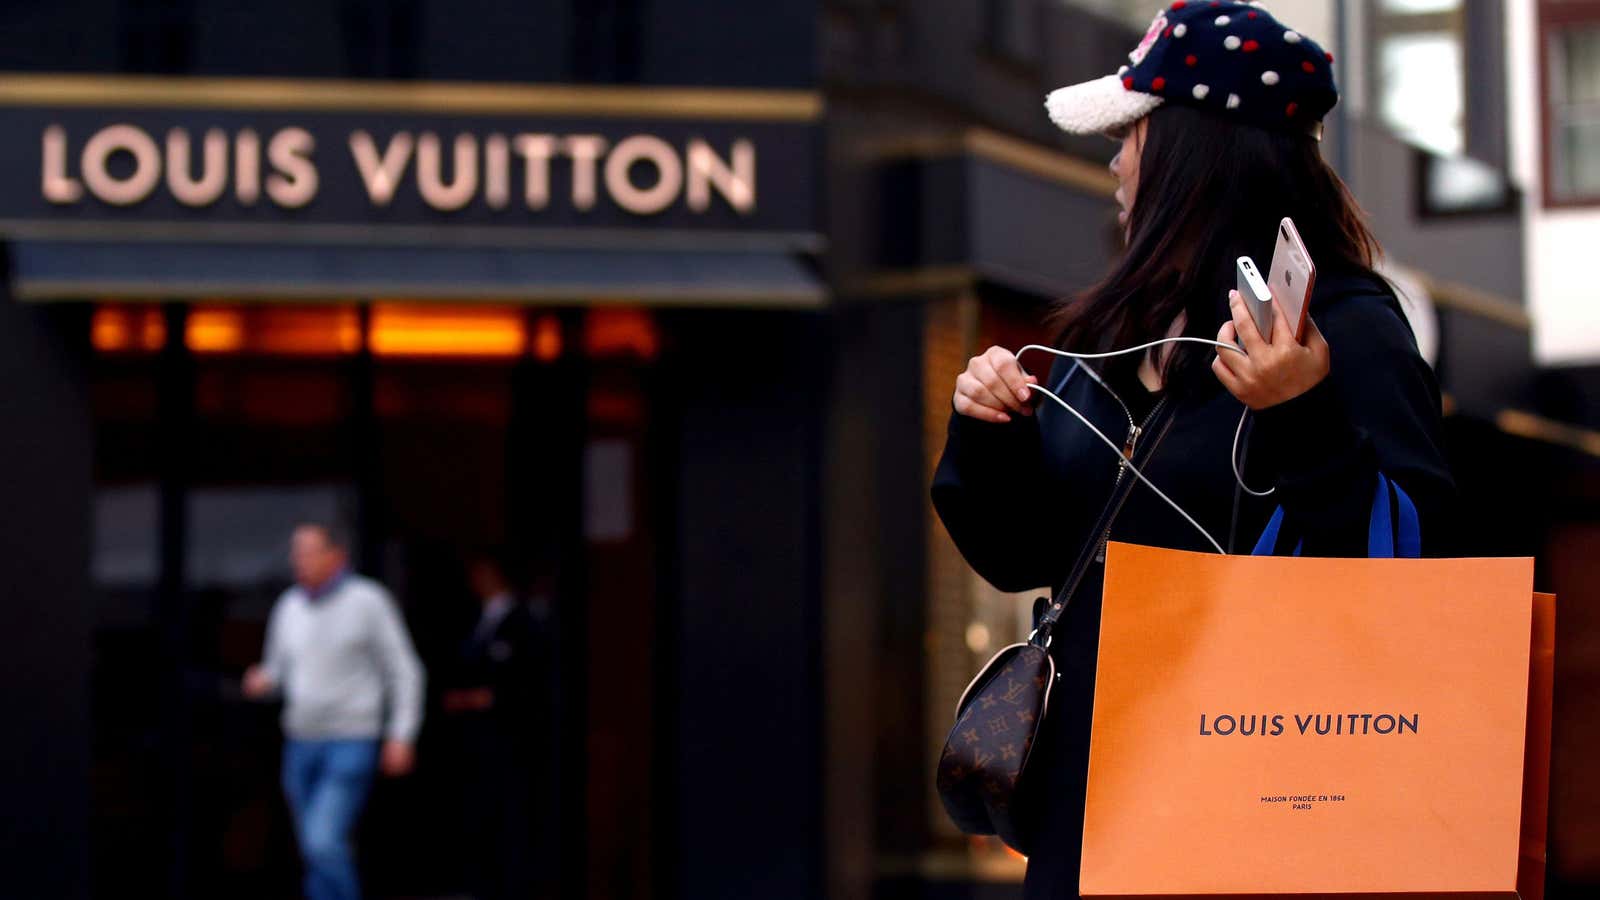 Louis Vuitton is one brand taking more sales into its own hands.